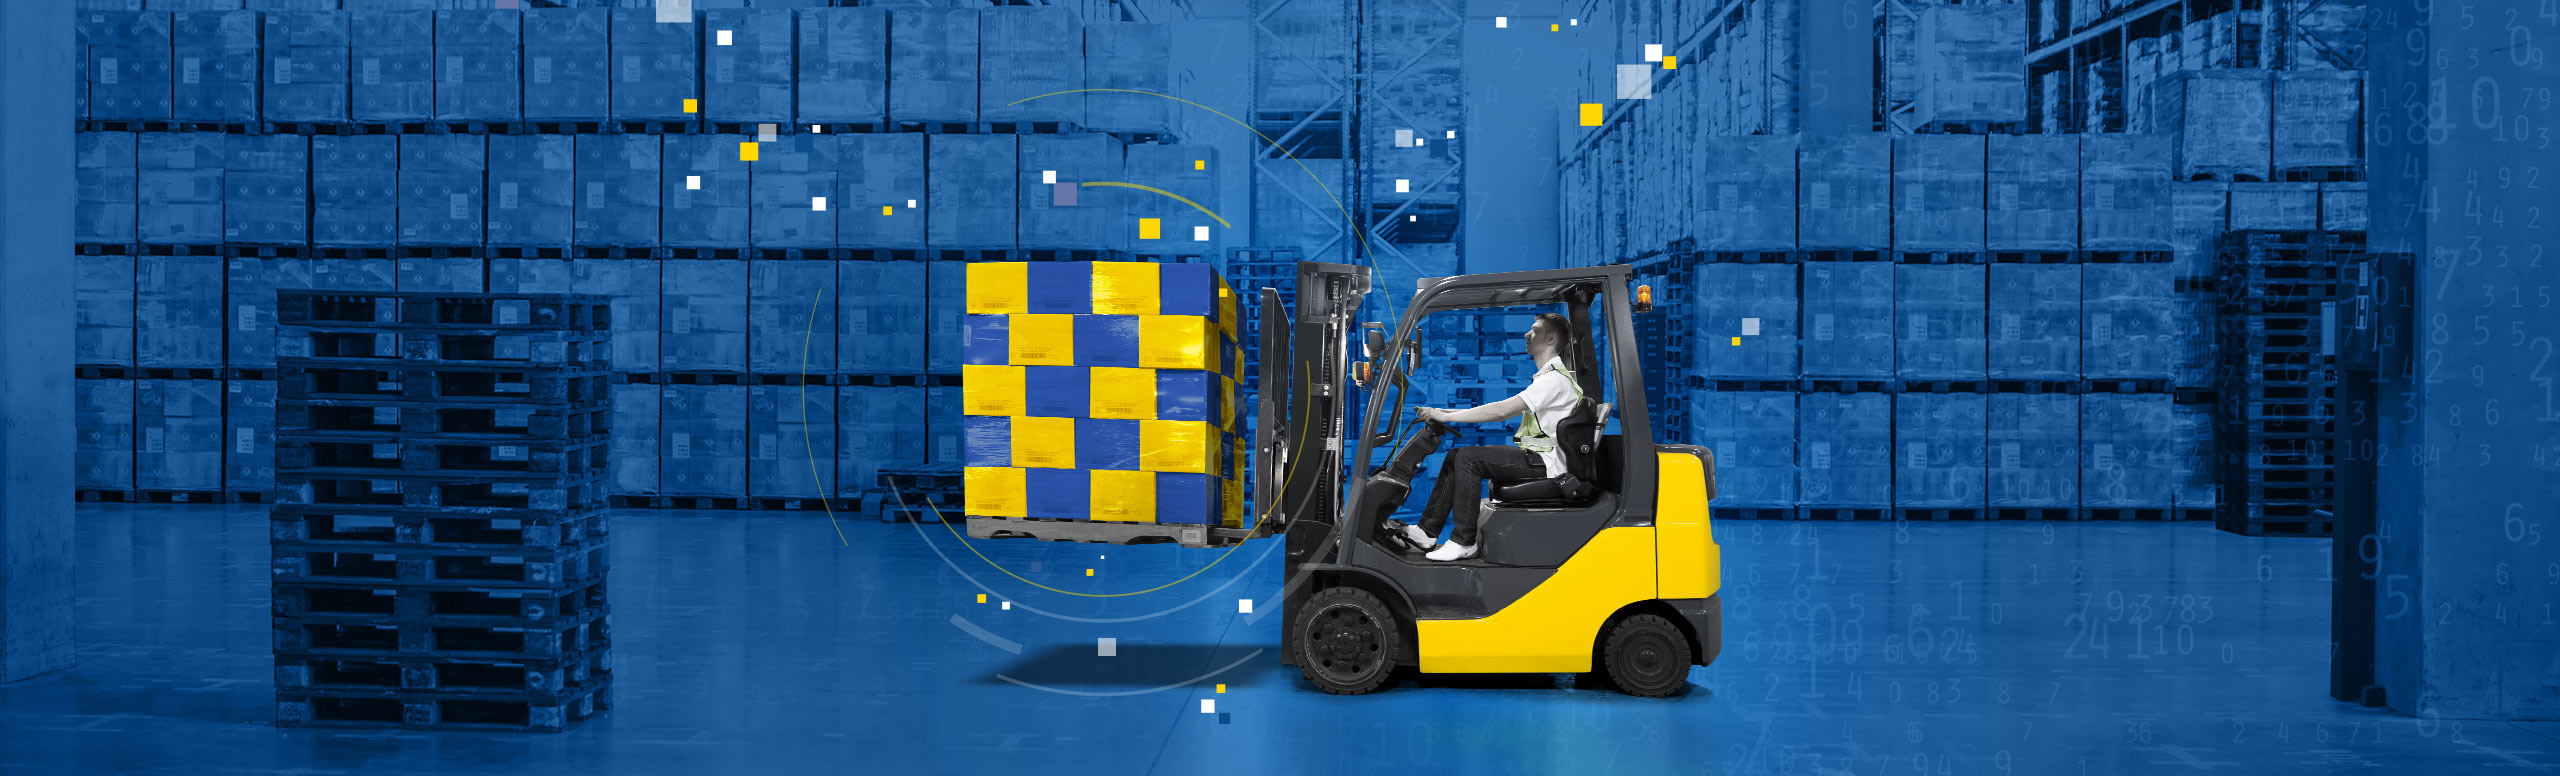 Warehouse interior with yellow forklift holding 20 blue and yellow boxes